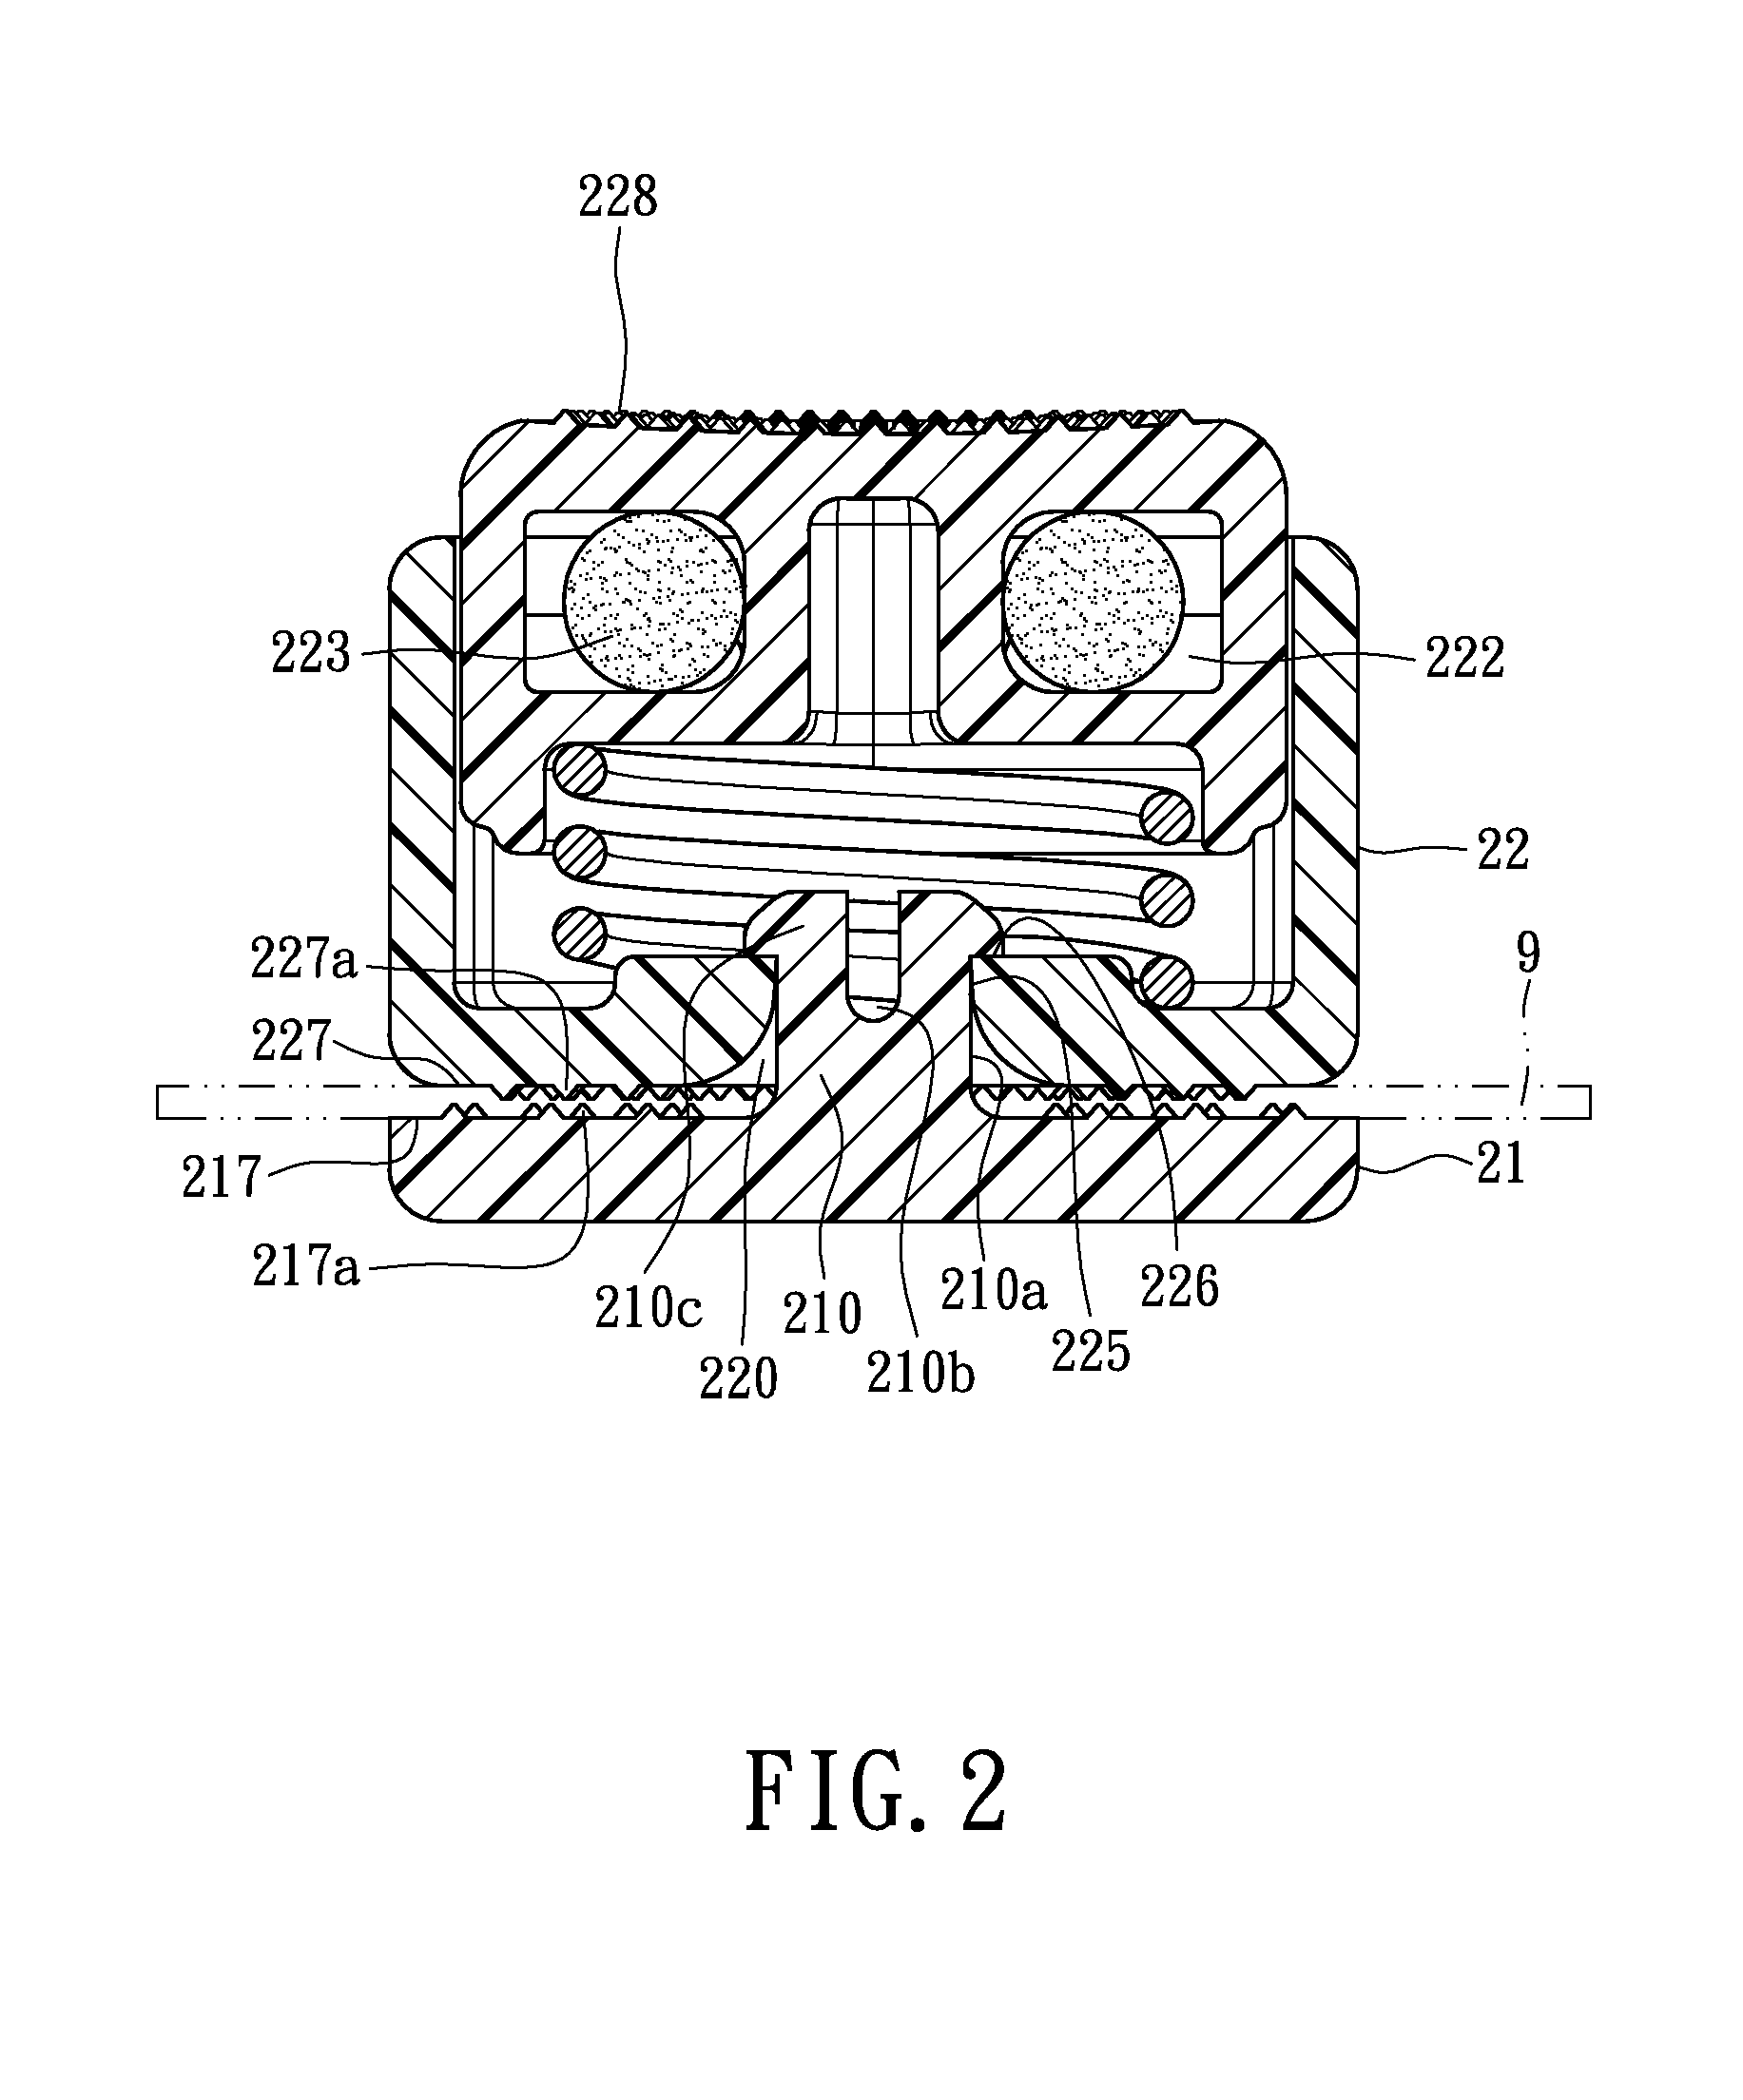 Method for fastening a cord lock device on a fabric